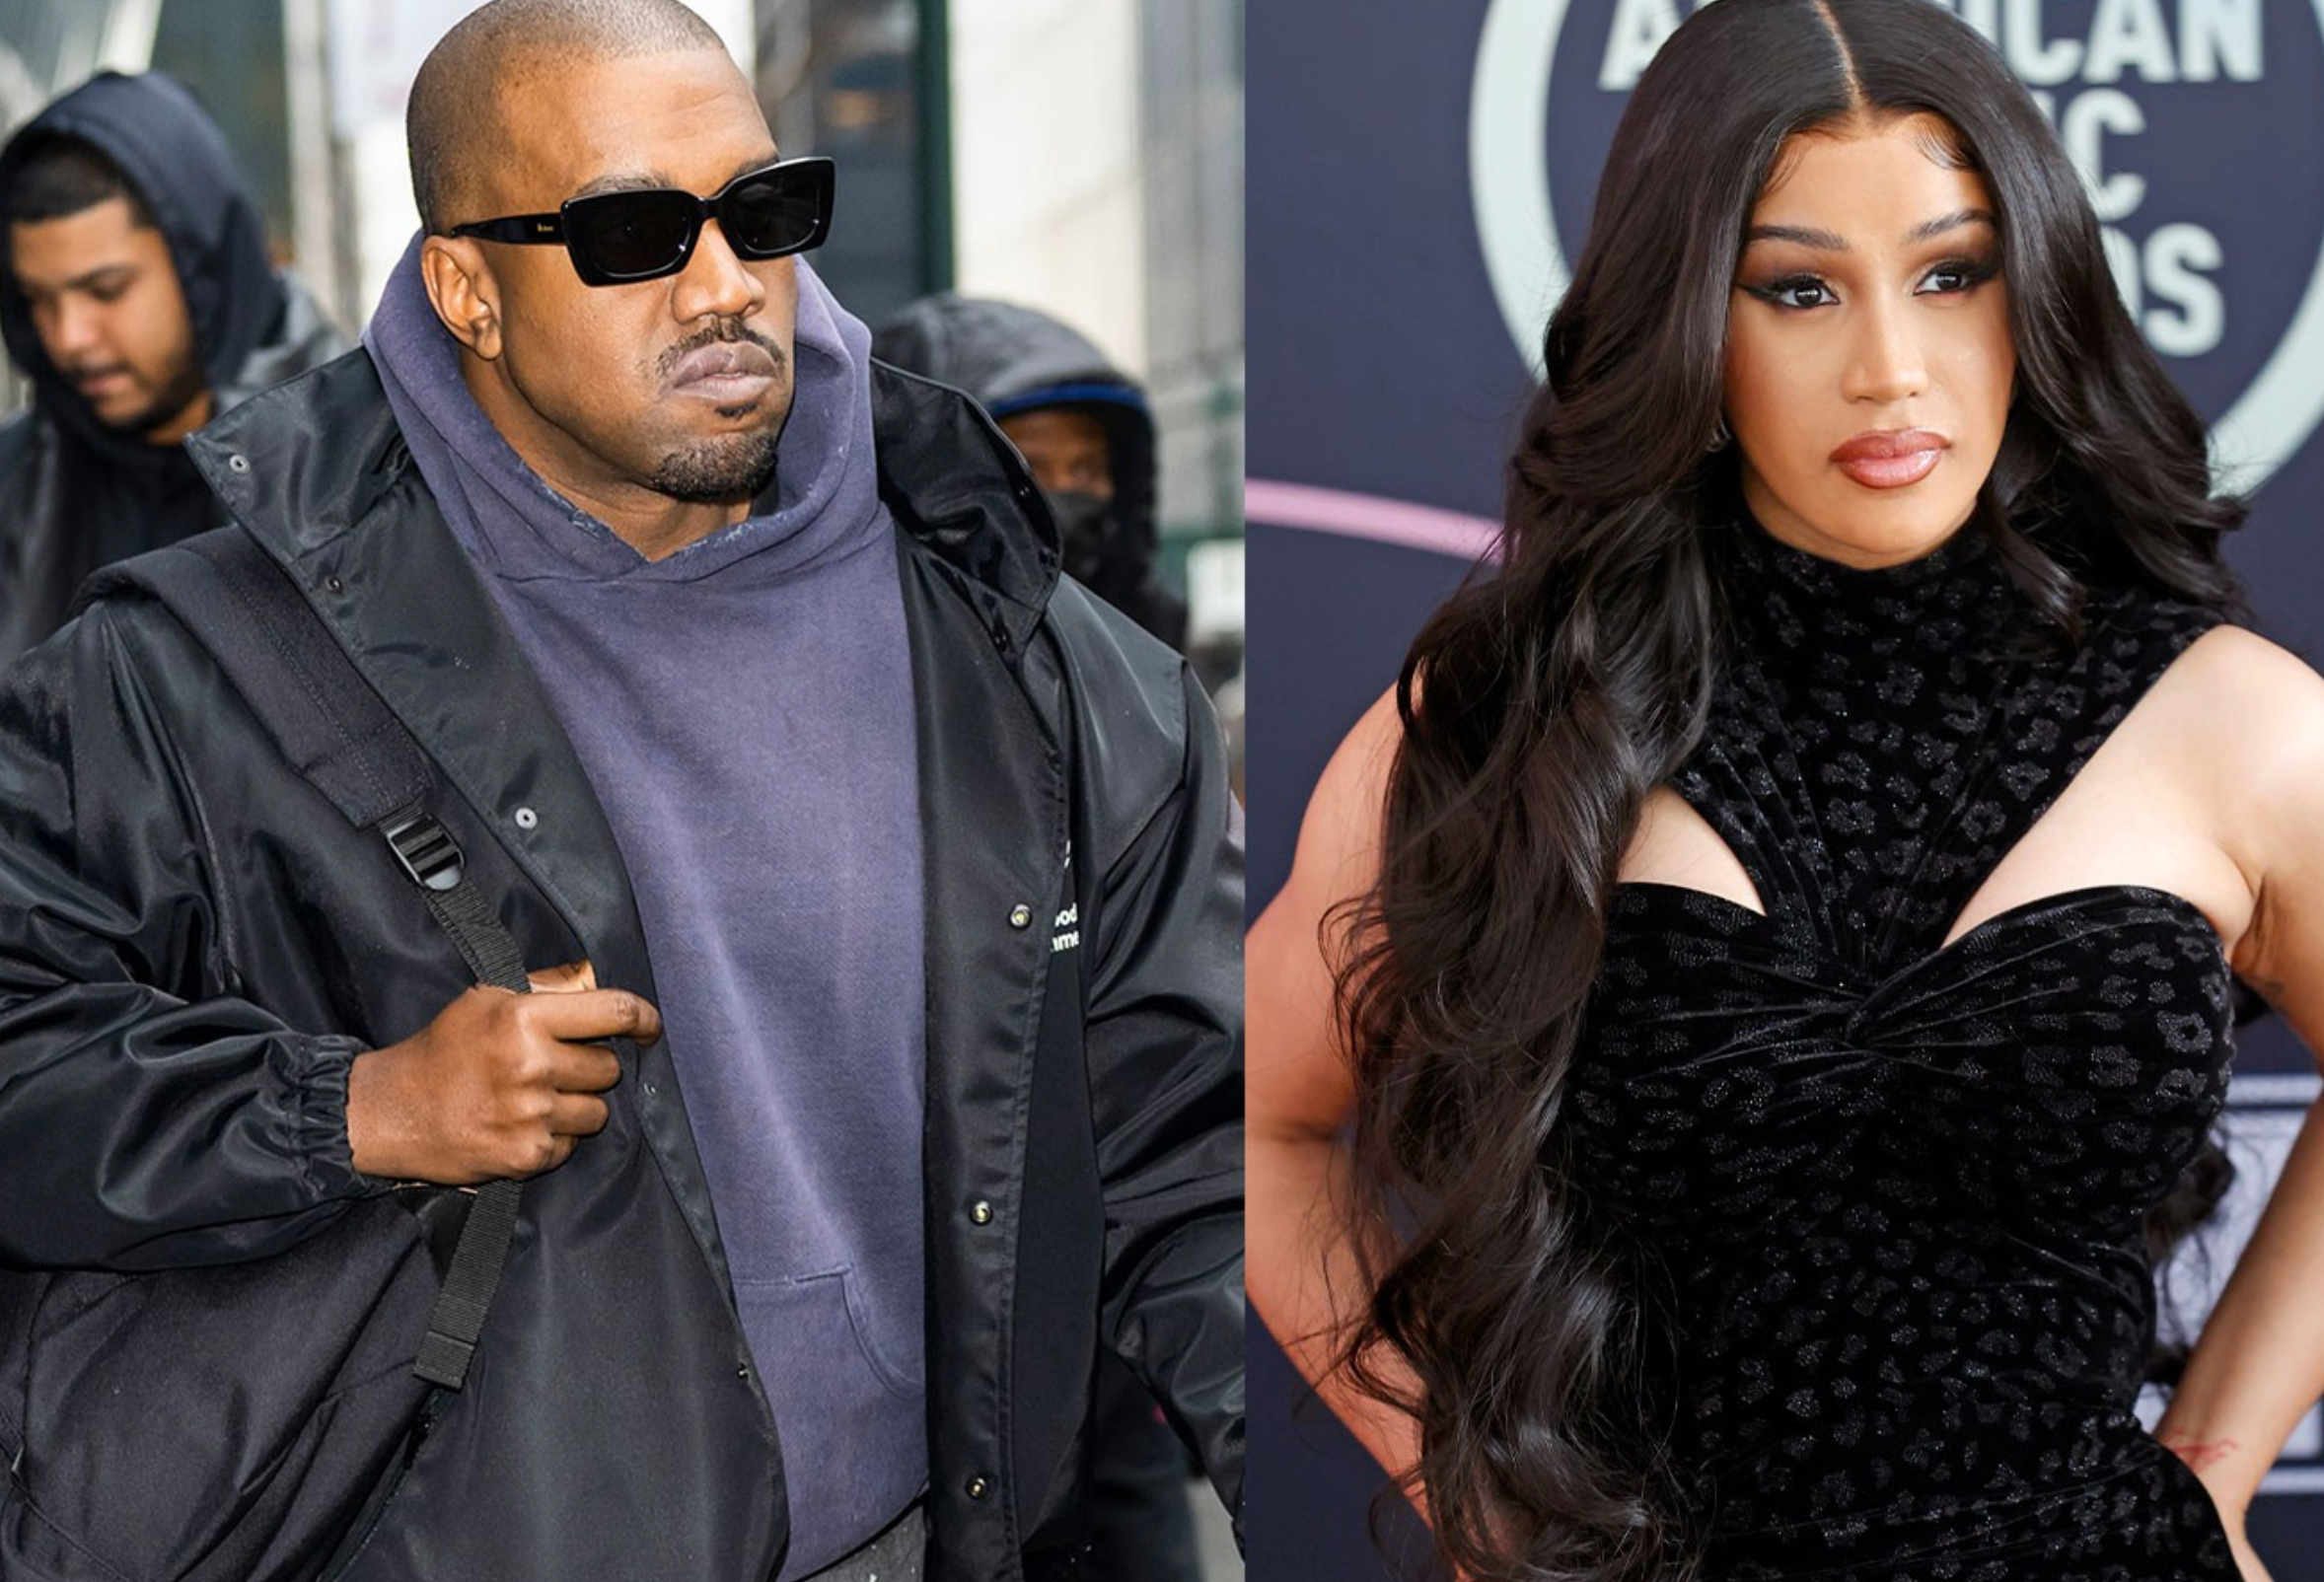 Cardi B and Kanye West Reportedly Filmed a Music Video in a Balenciaga Store